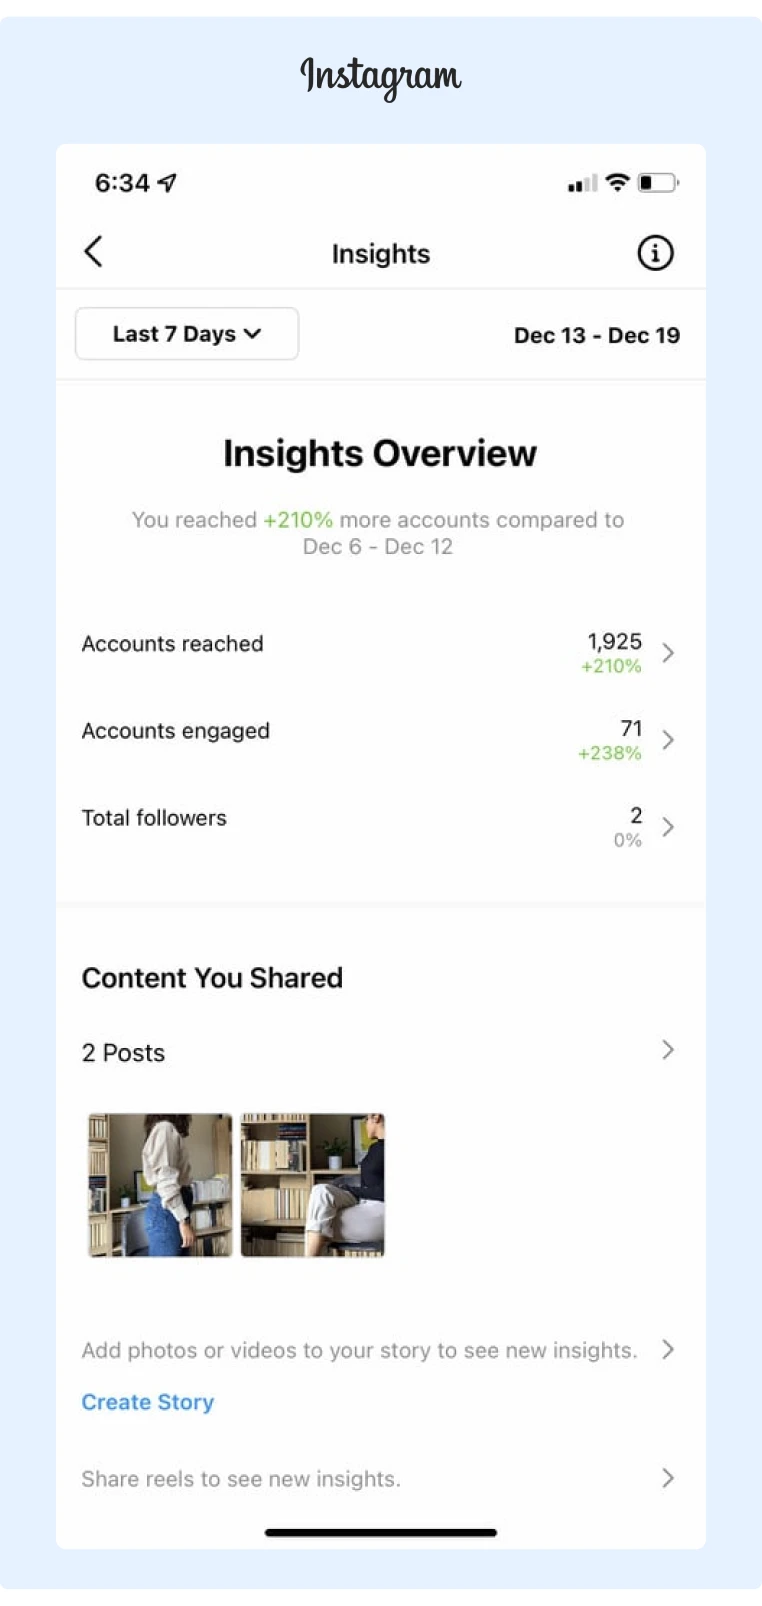 Instagram Insights Overview Dashboard gives you access to track your followers and reactions